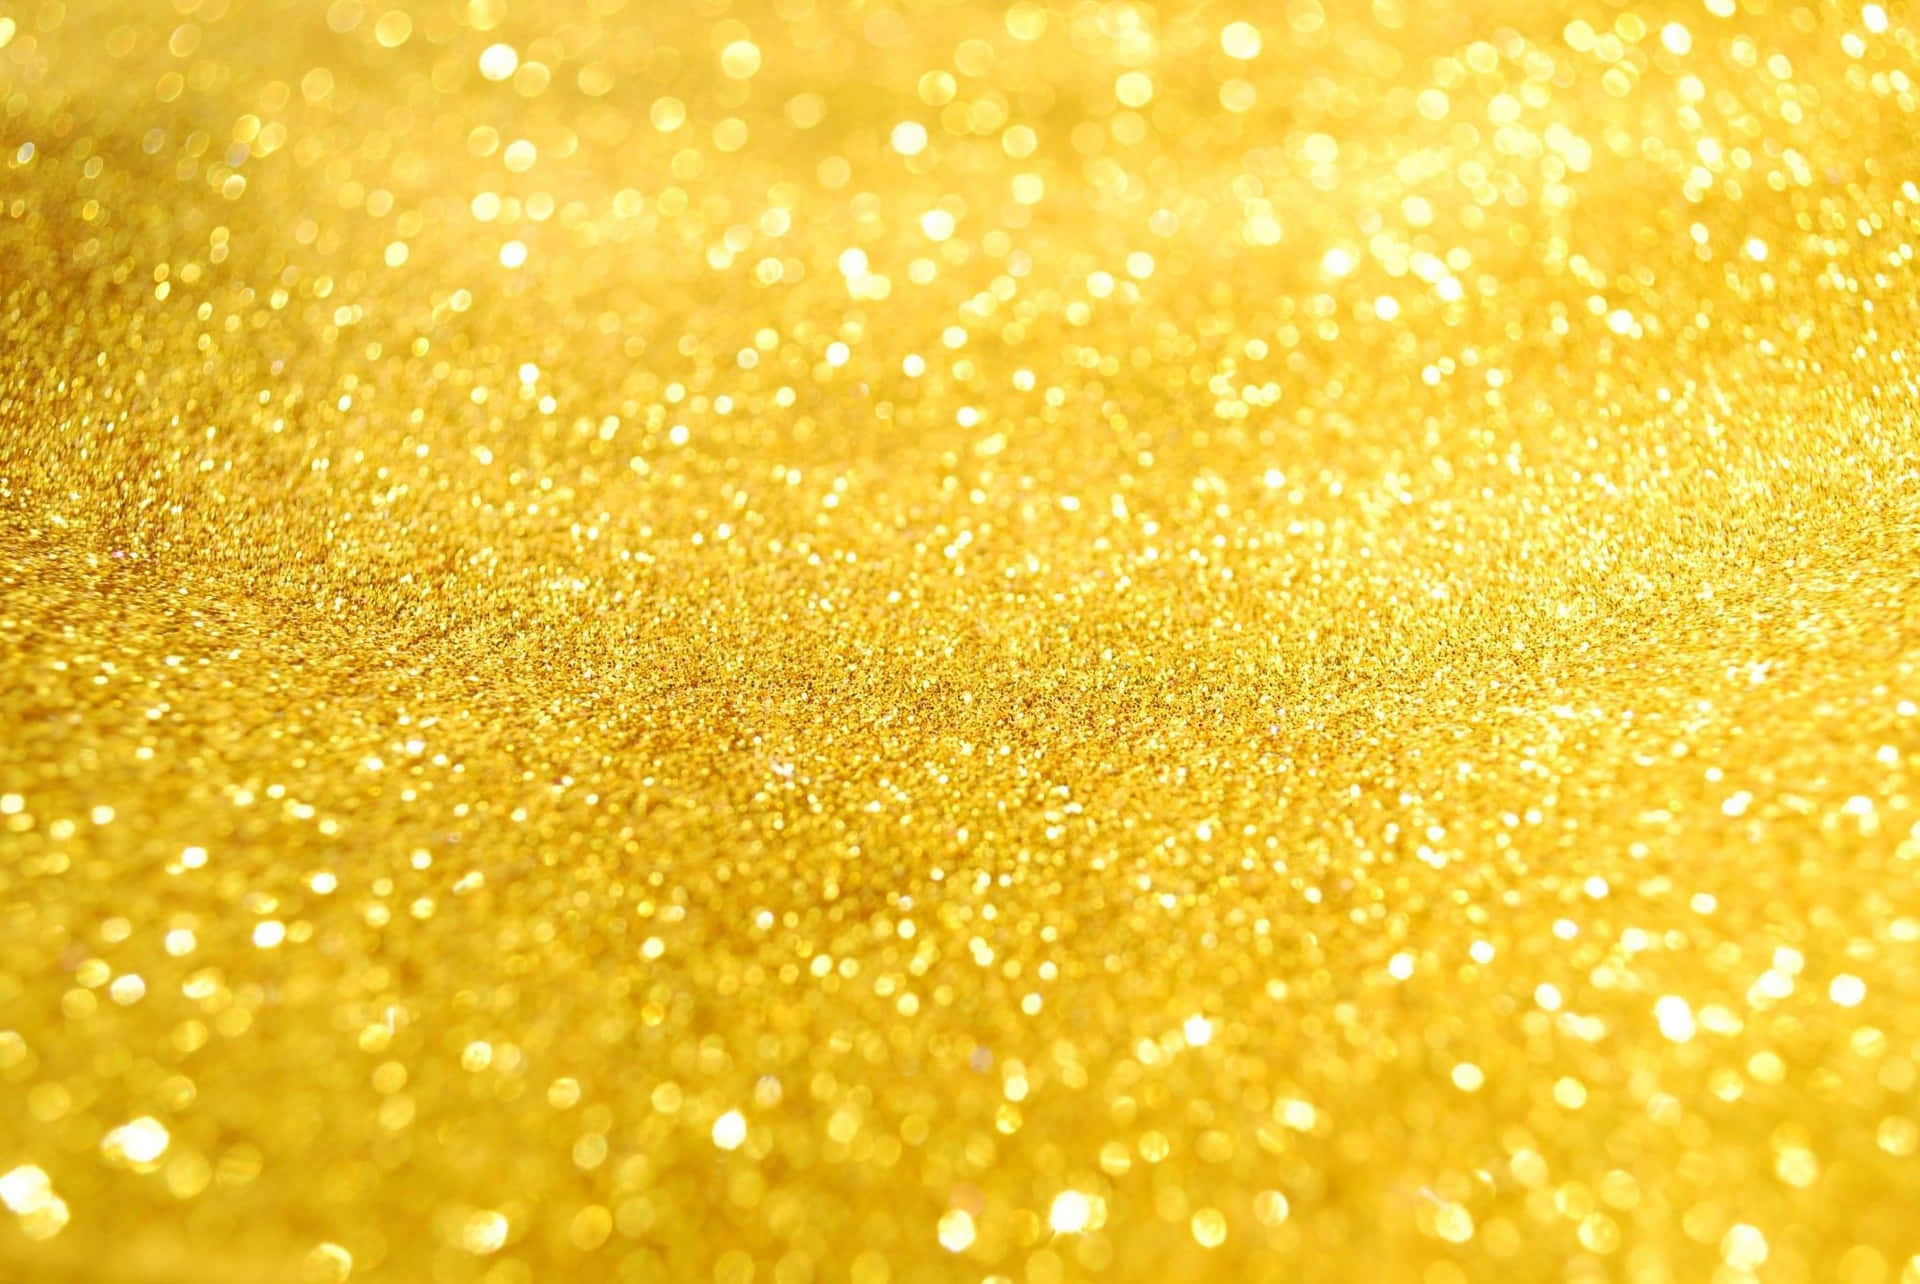 Shine bright with a Yellow Glitter background!